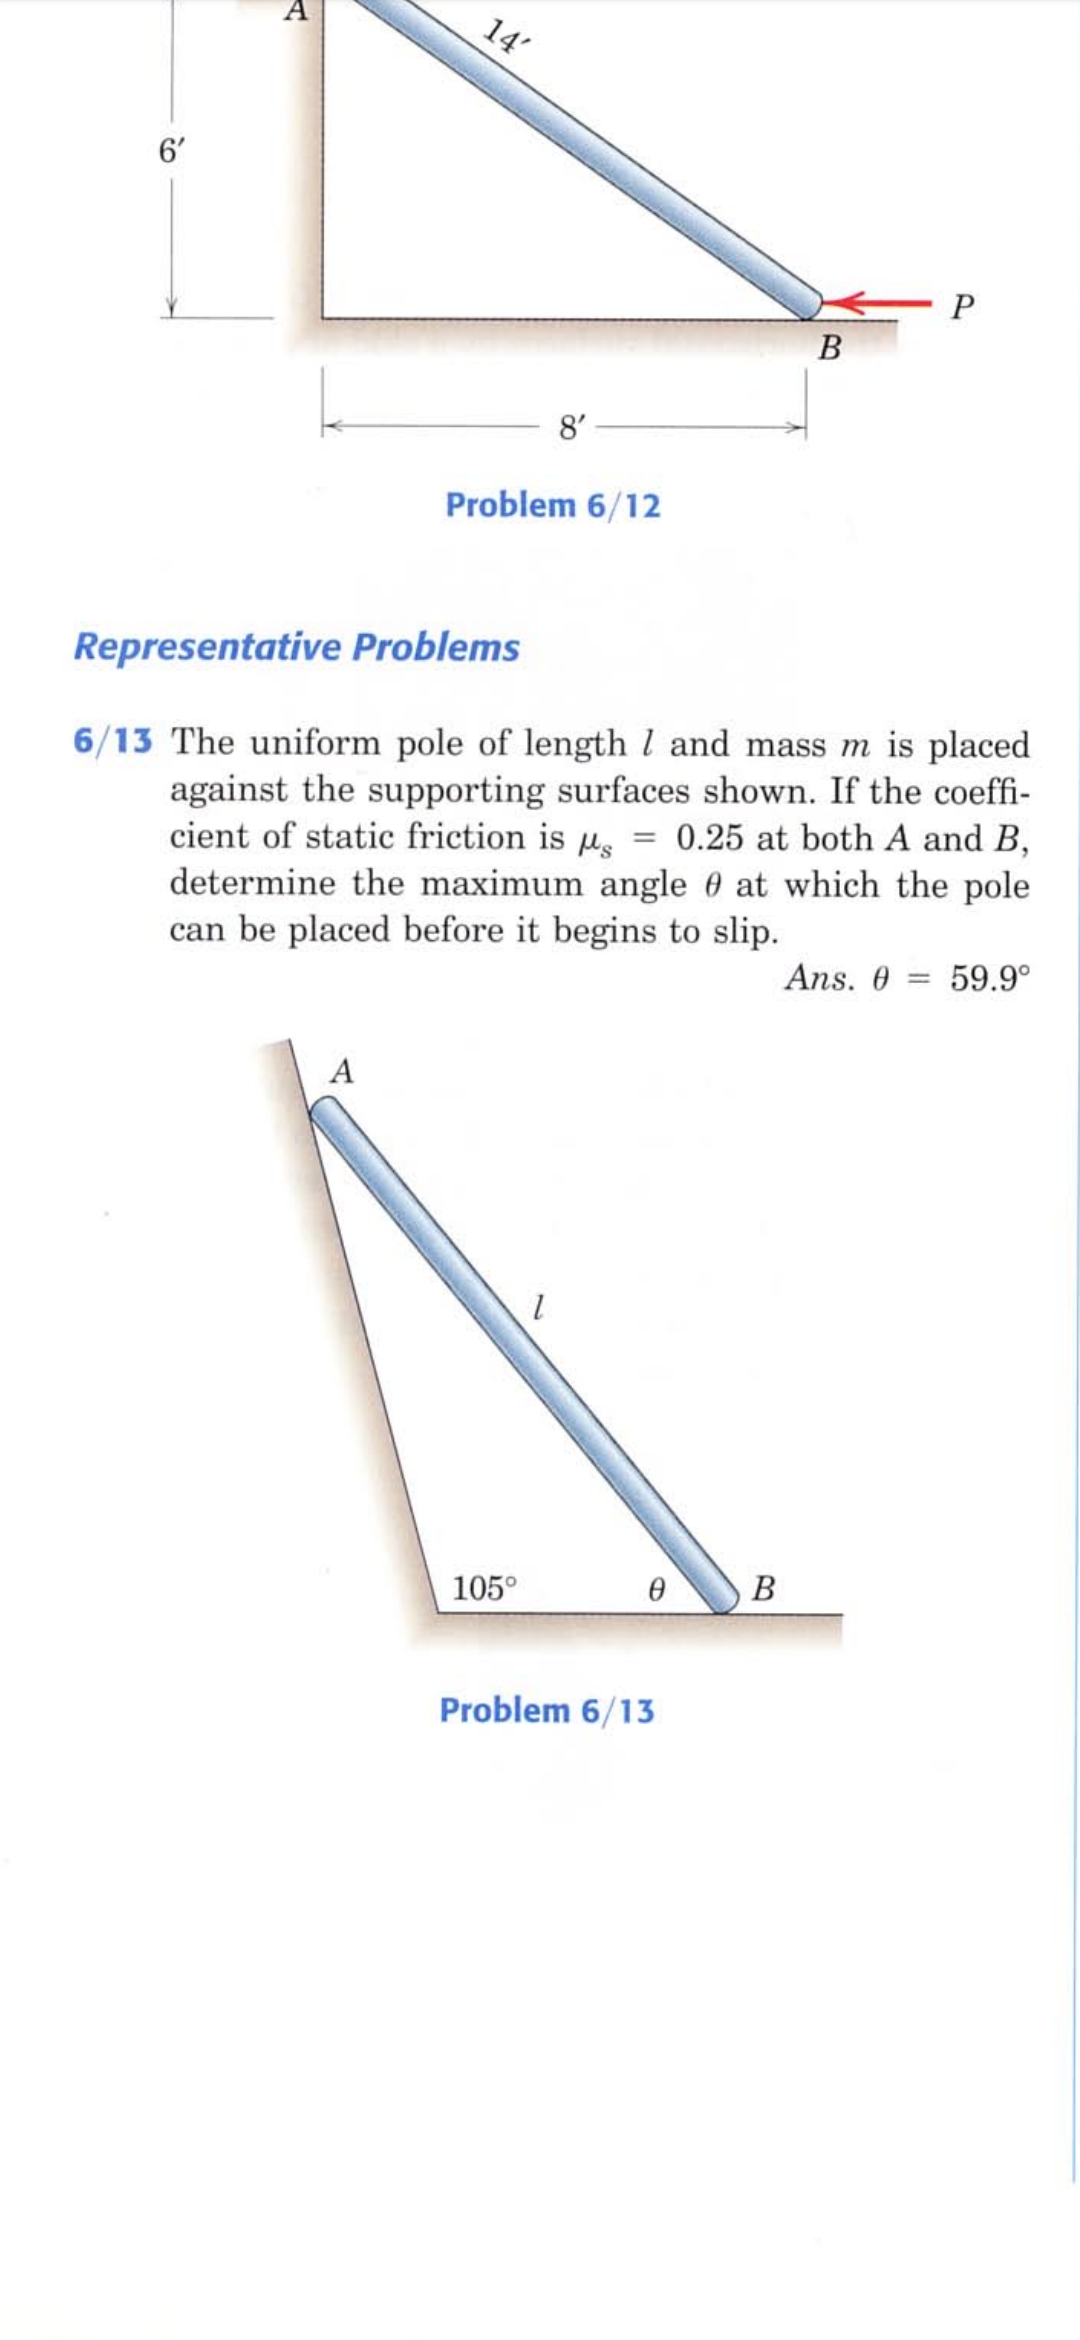 A
6'
В
8'
Problem 6/12
Representative Problems
6/13 The uniform pole of length l and mass m is placed
against the supporting surfaces shown. If the coeffi-
cient of static friction is us
determine the maximum angle 0 at which the pole
can be placed before it begins to slip.
0.25 at both A and B,
Ans. 0 =
59.9°
А
105°
В
Problem 6/13
14'
